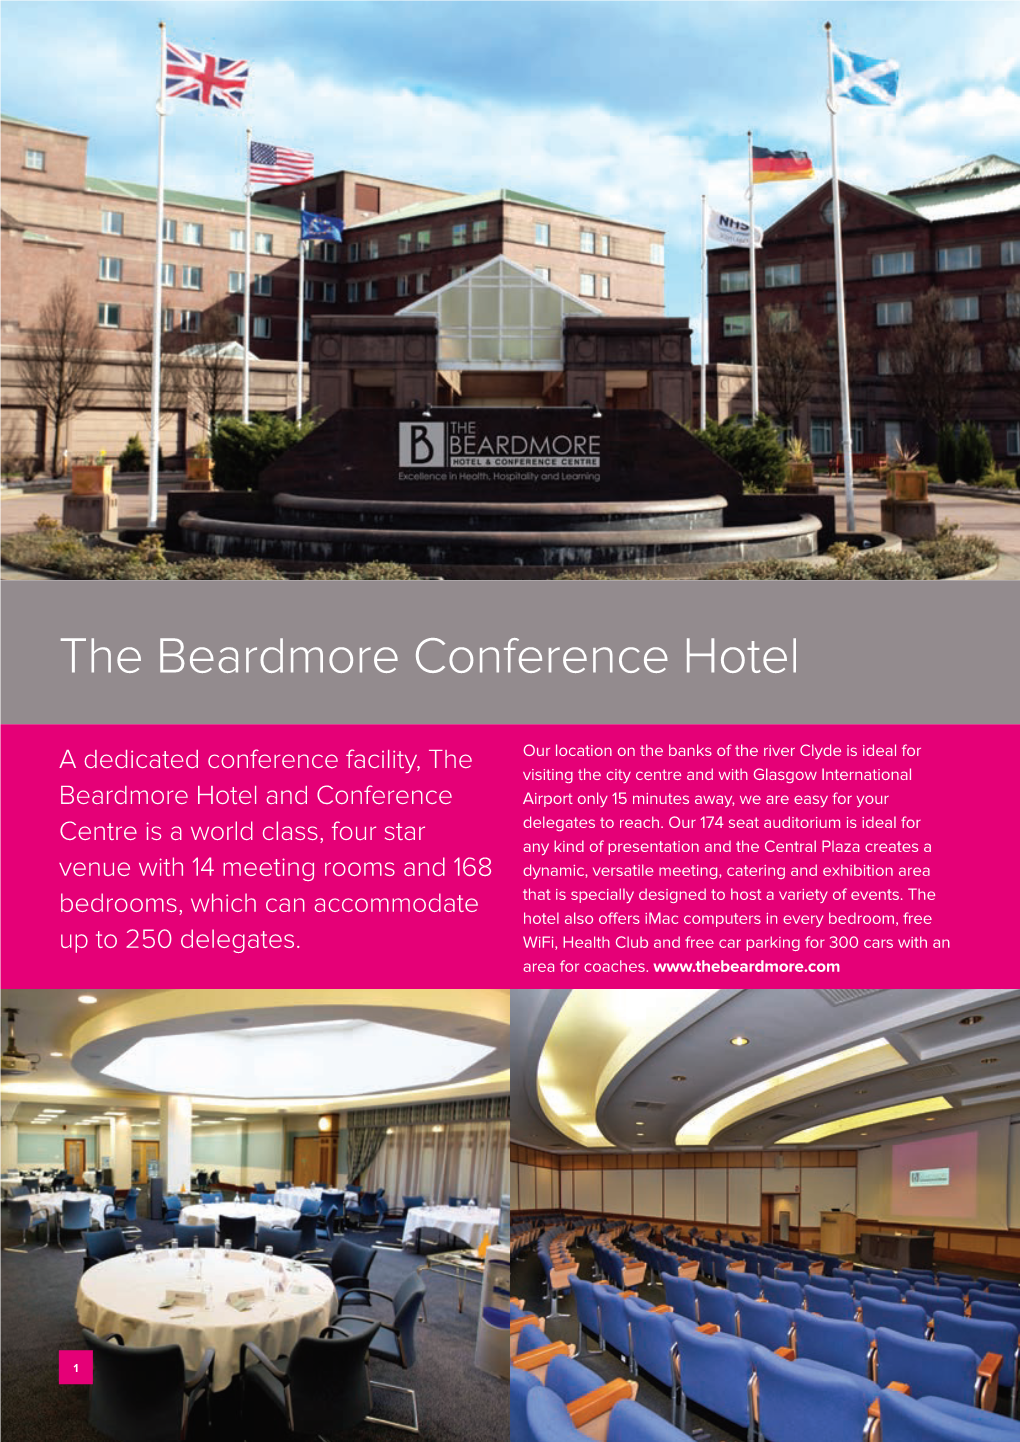 The Beardmore Conference Hotel